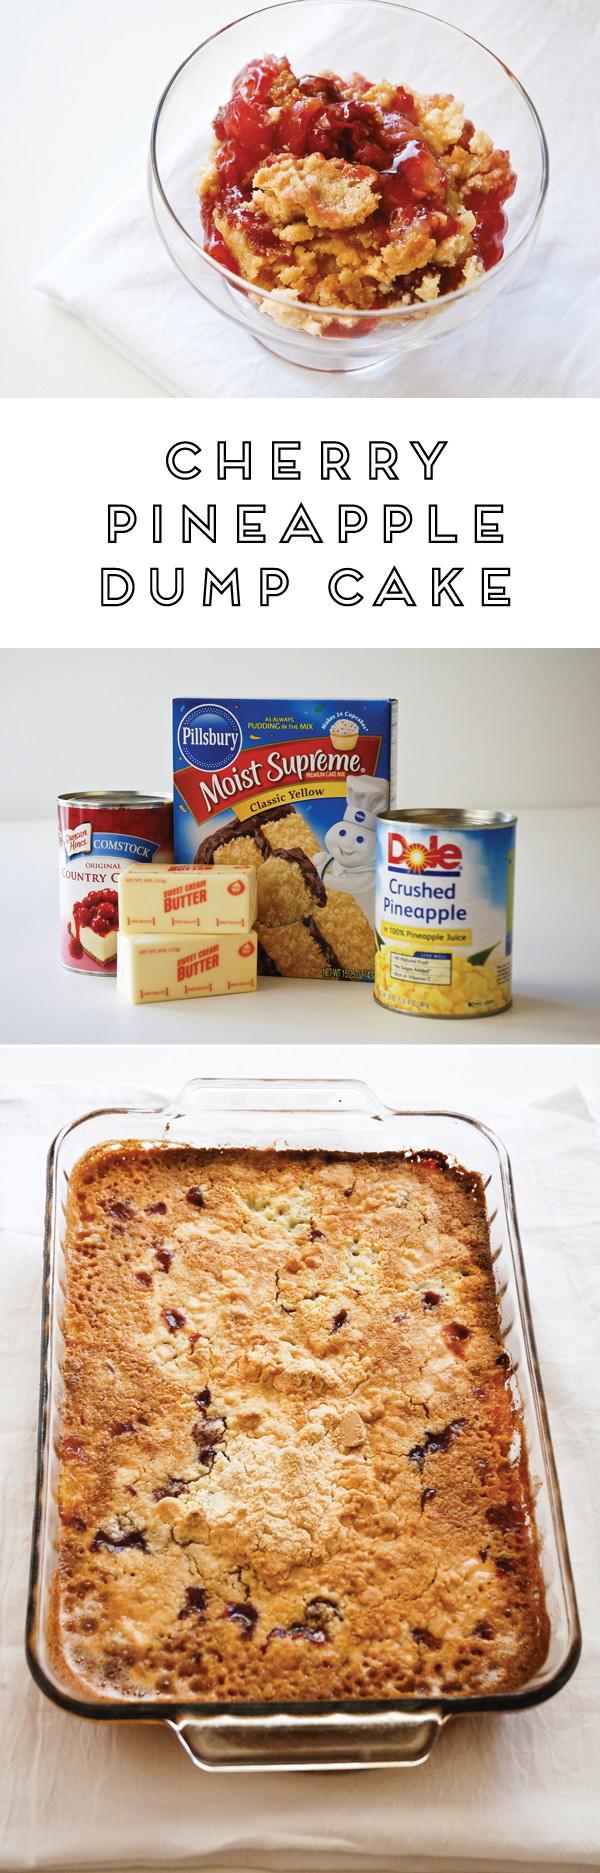 The best dump cake recipe ever! So easy to make and its super delicious. Always a crowd pleaser! #cake_recipes_fruit